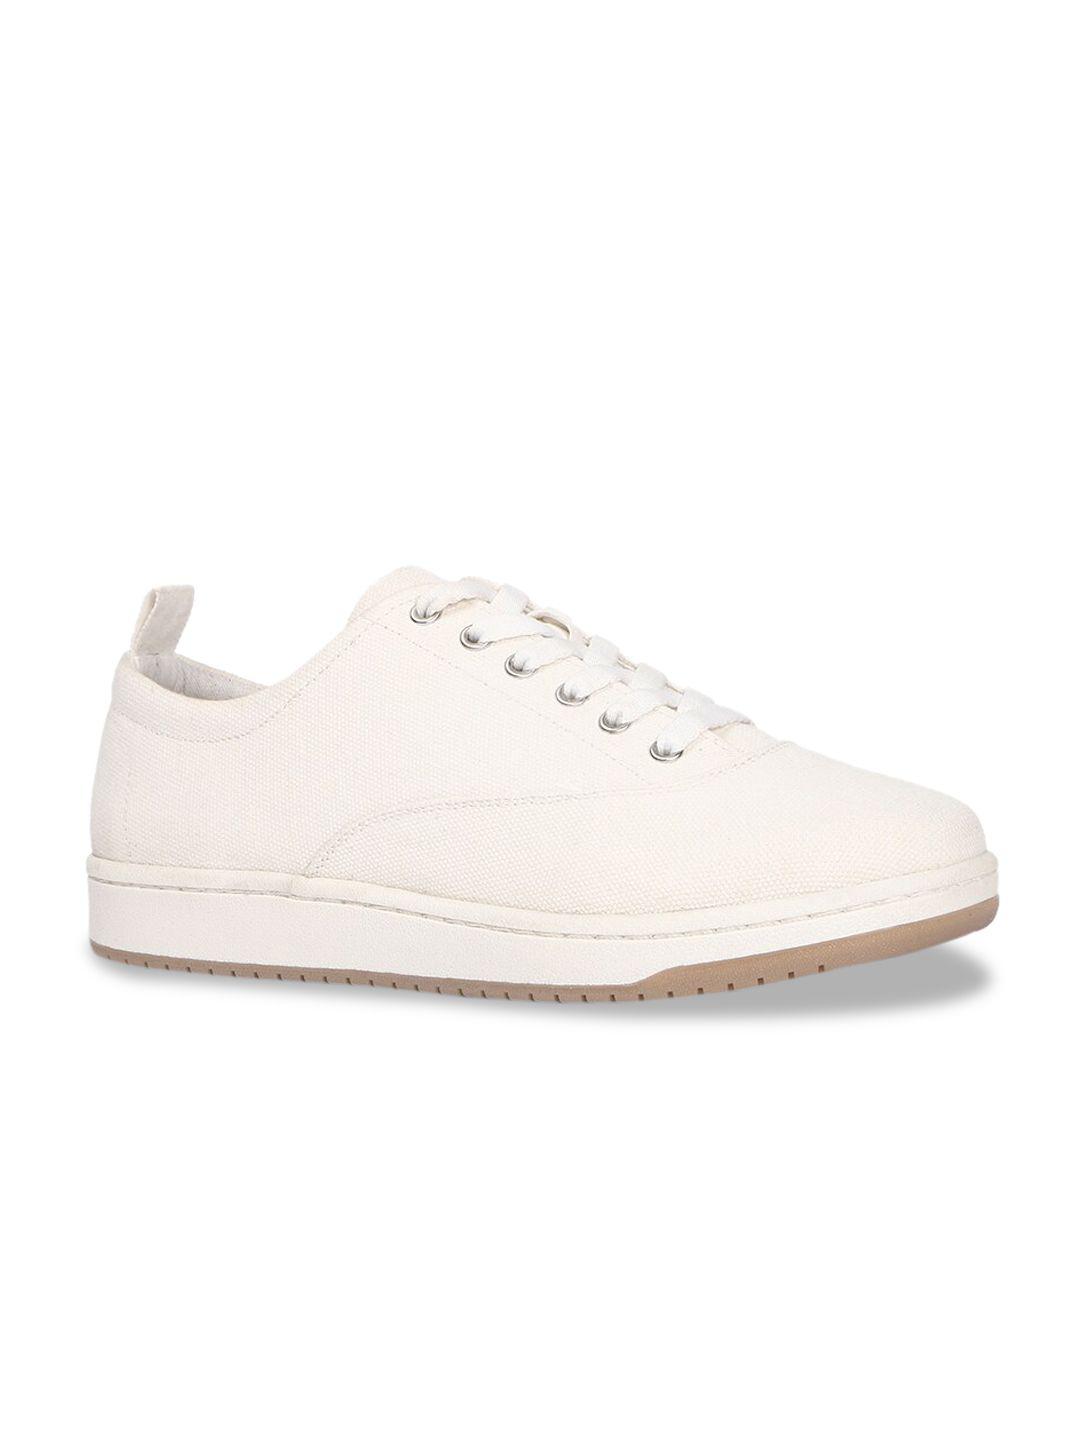 forever-21-men-white-sneakers-shoes